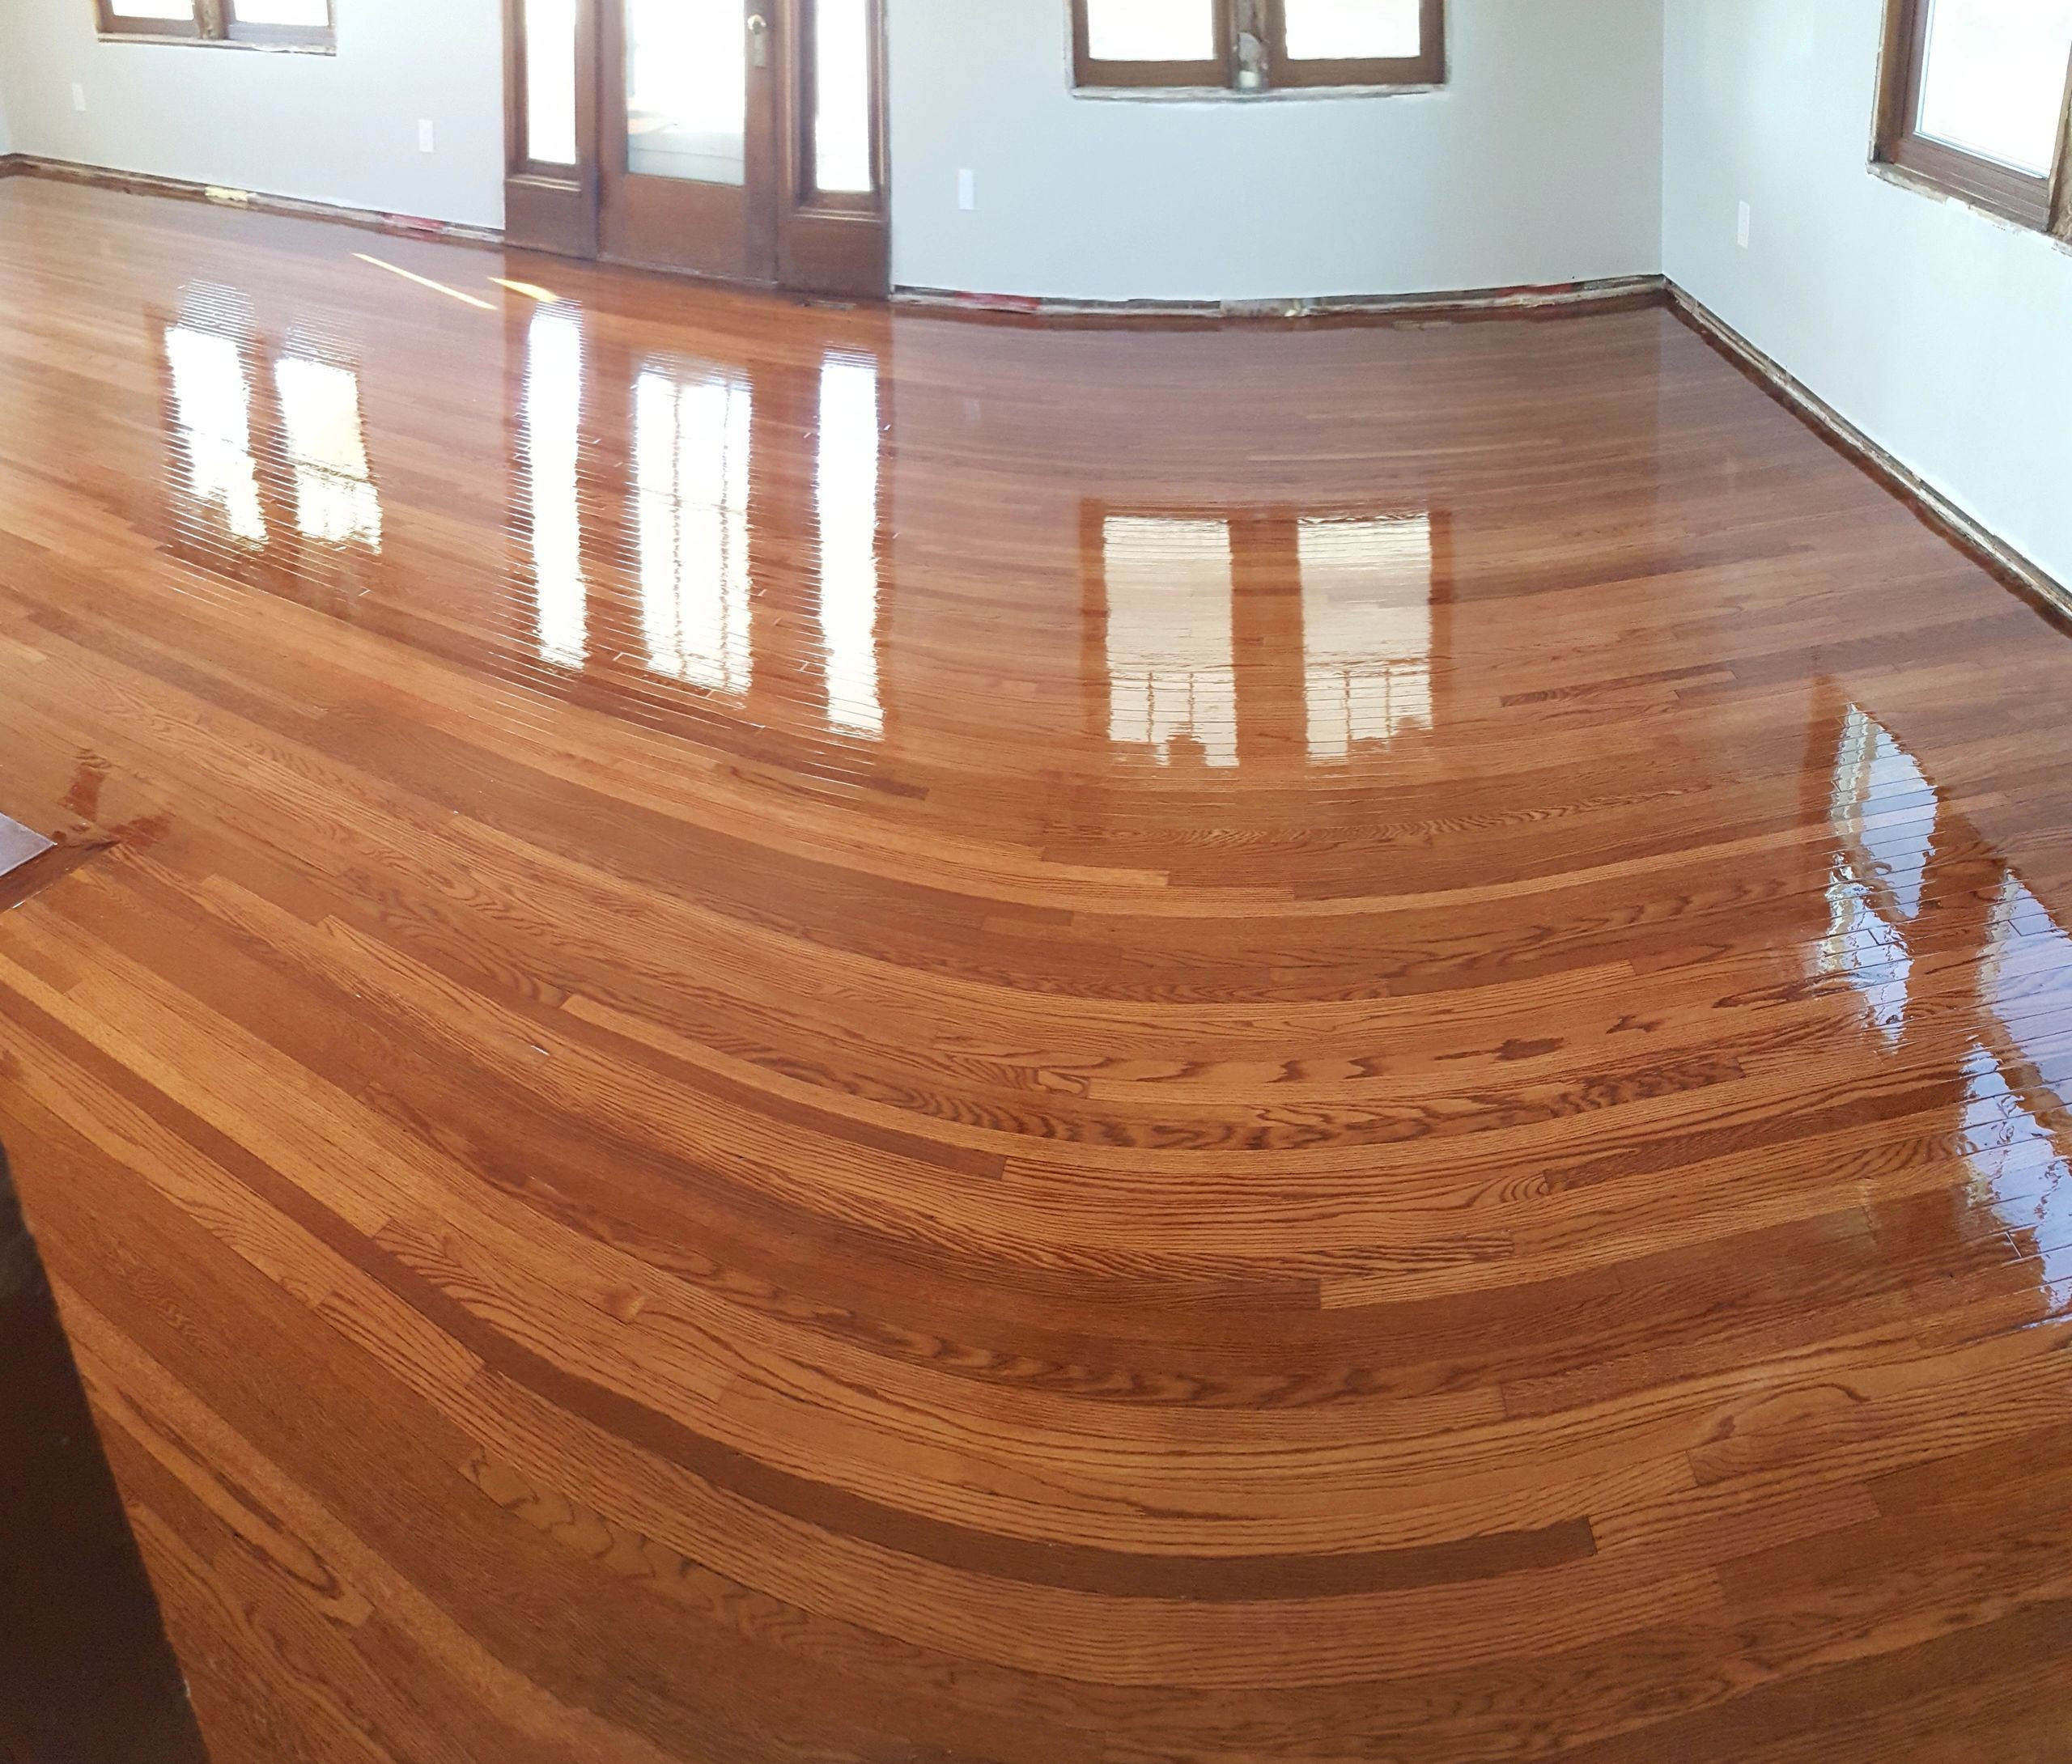 19 Spectacular Clearance Engineered Hardwood Flooring 2023 free download clearance engineered hardwood flooring of laminate flooring clearance engineered hardwood floor cheap laminate inside laminate flooring clearance wide plank distressed pine flooring cheap up